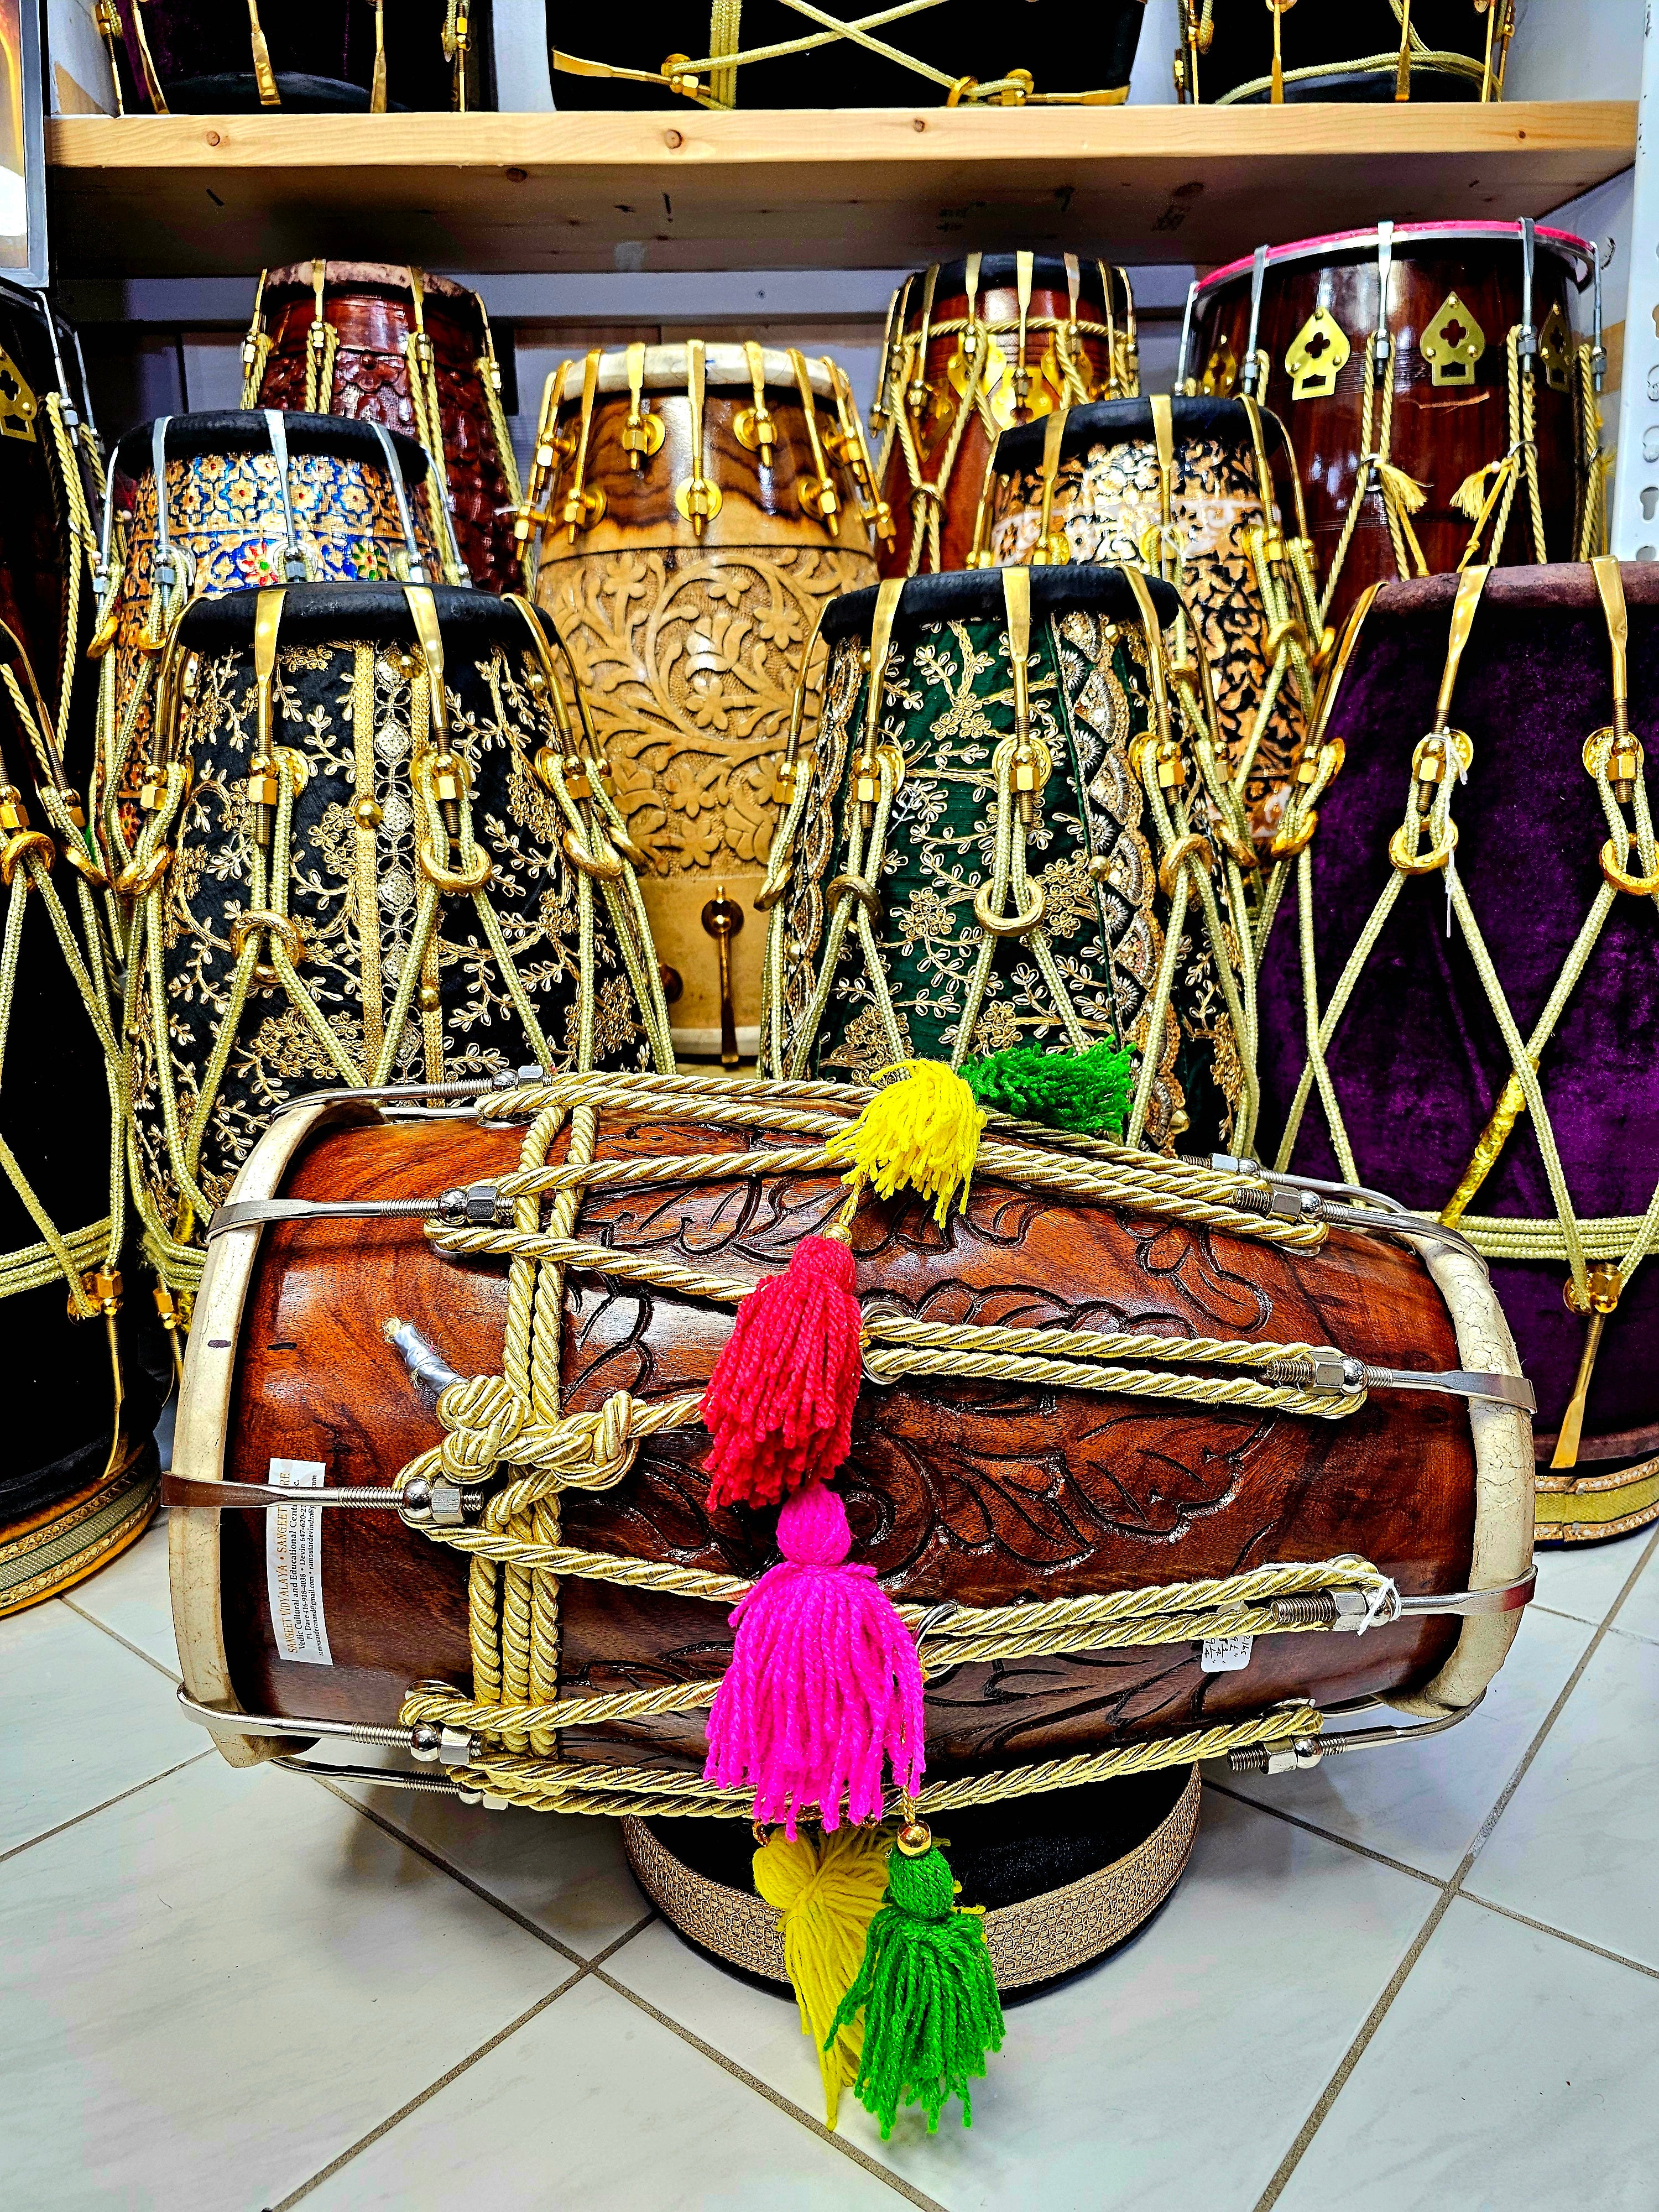 Regal Resonance: Encarved Red Sheesham Dholak with Chrome Bolts, Golden Ropes Design, and Multicolored Tassels